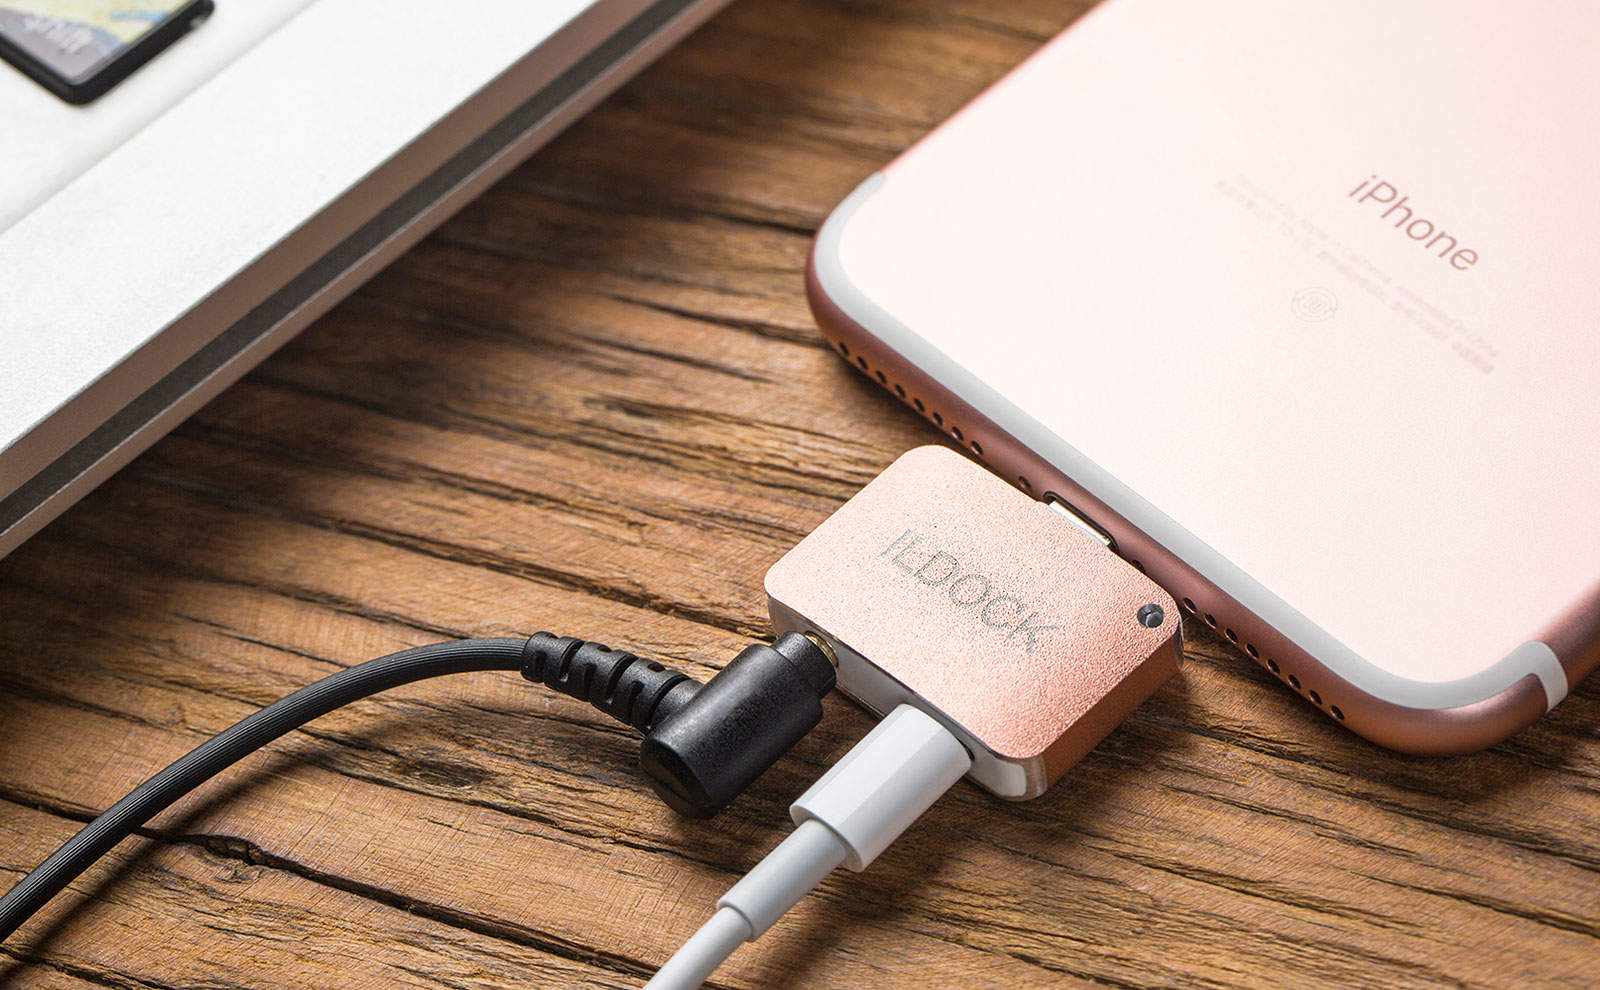 You can have your iPhone 7 and earphone jack, too, with the iLDOCK.